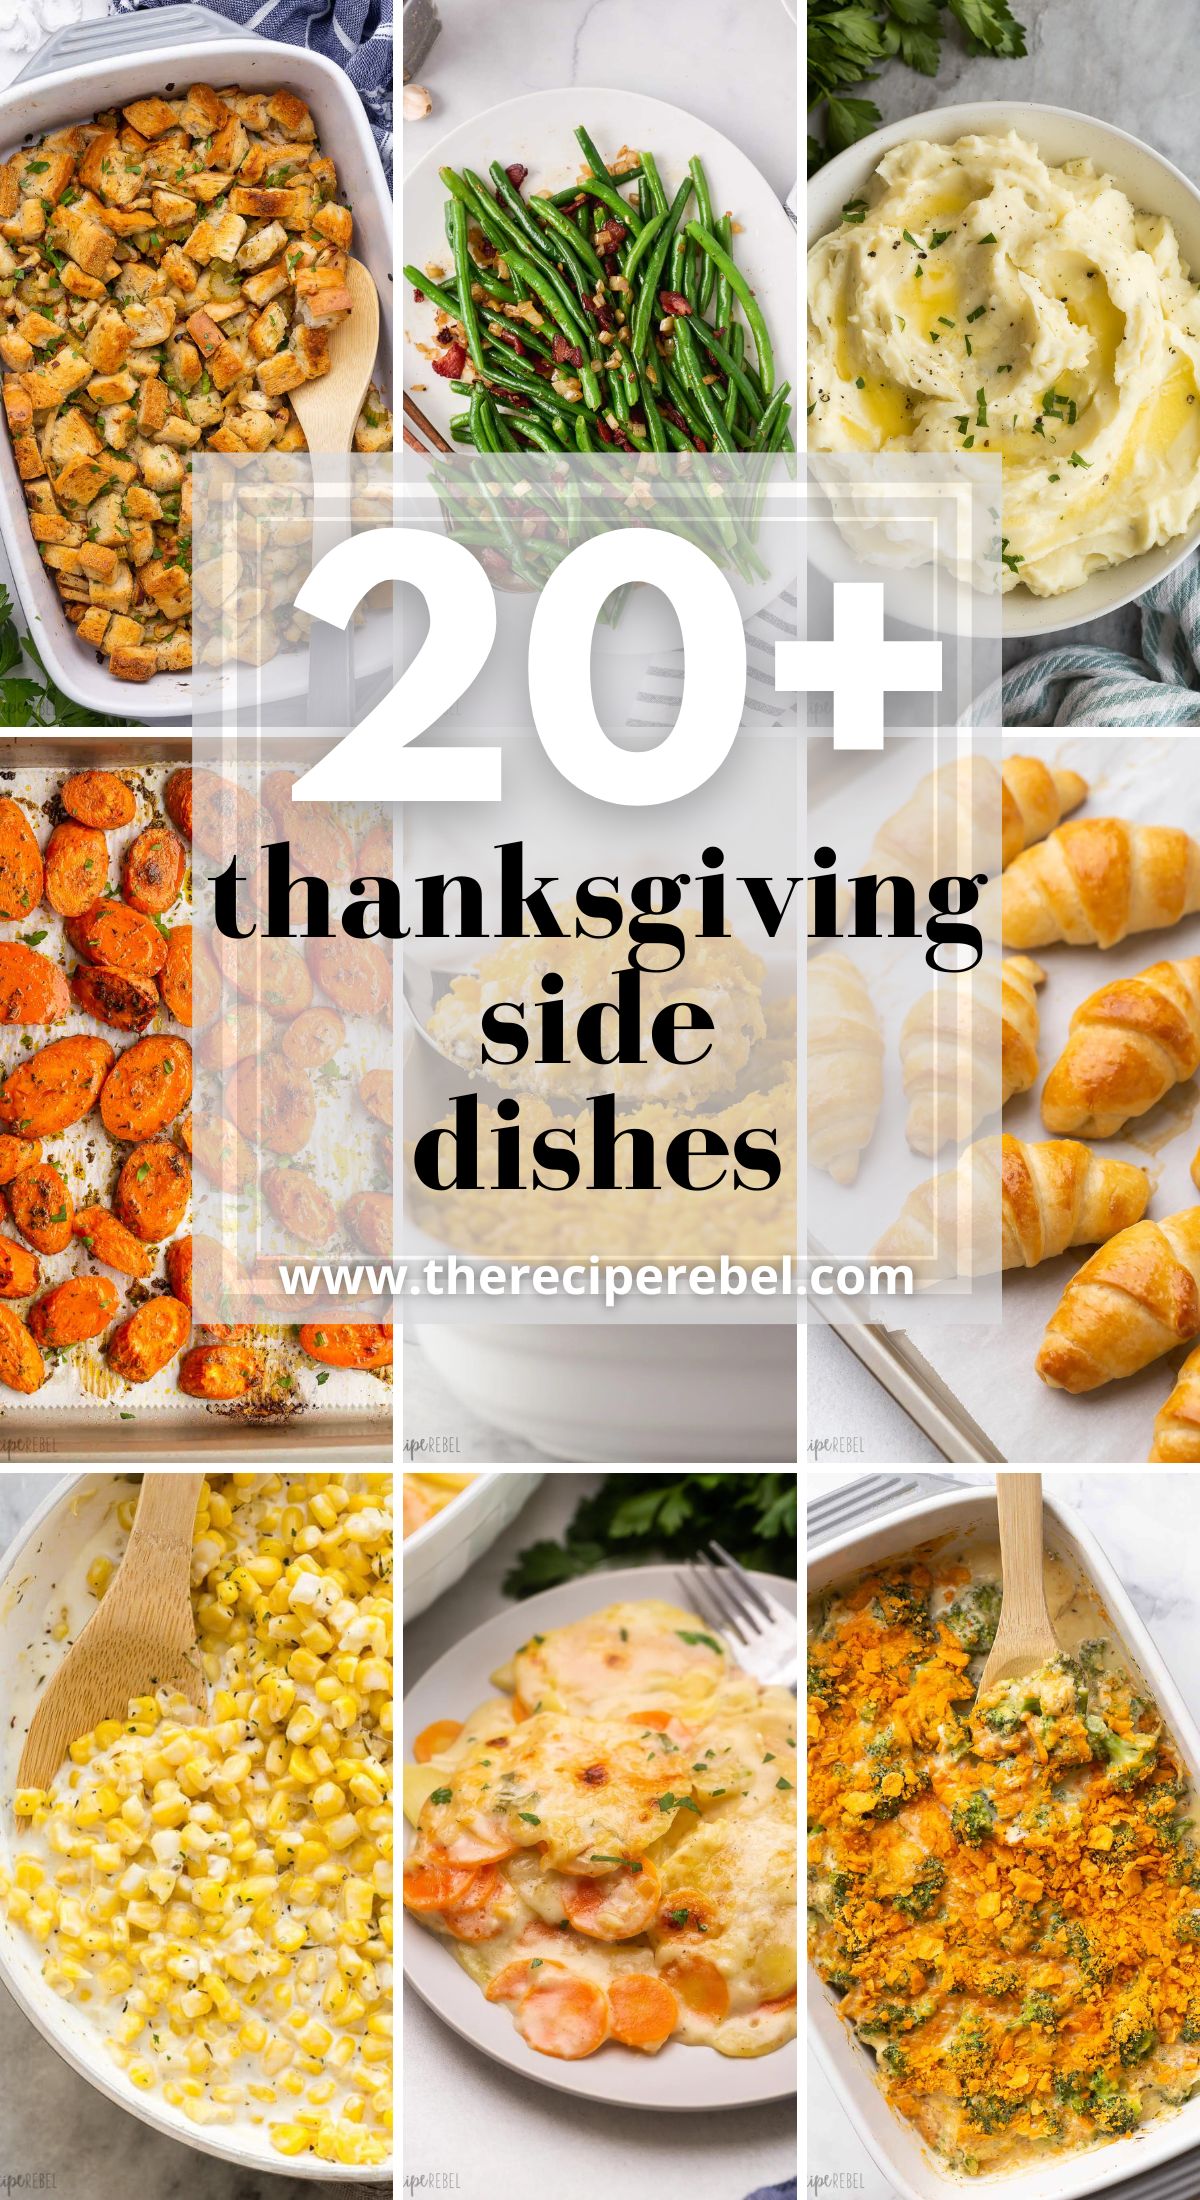 long photo collage for thanksgiving sides recipes.
